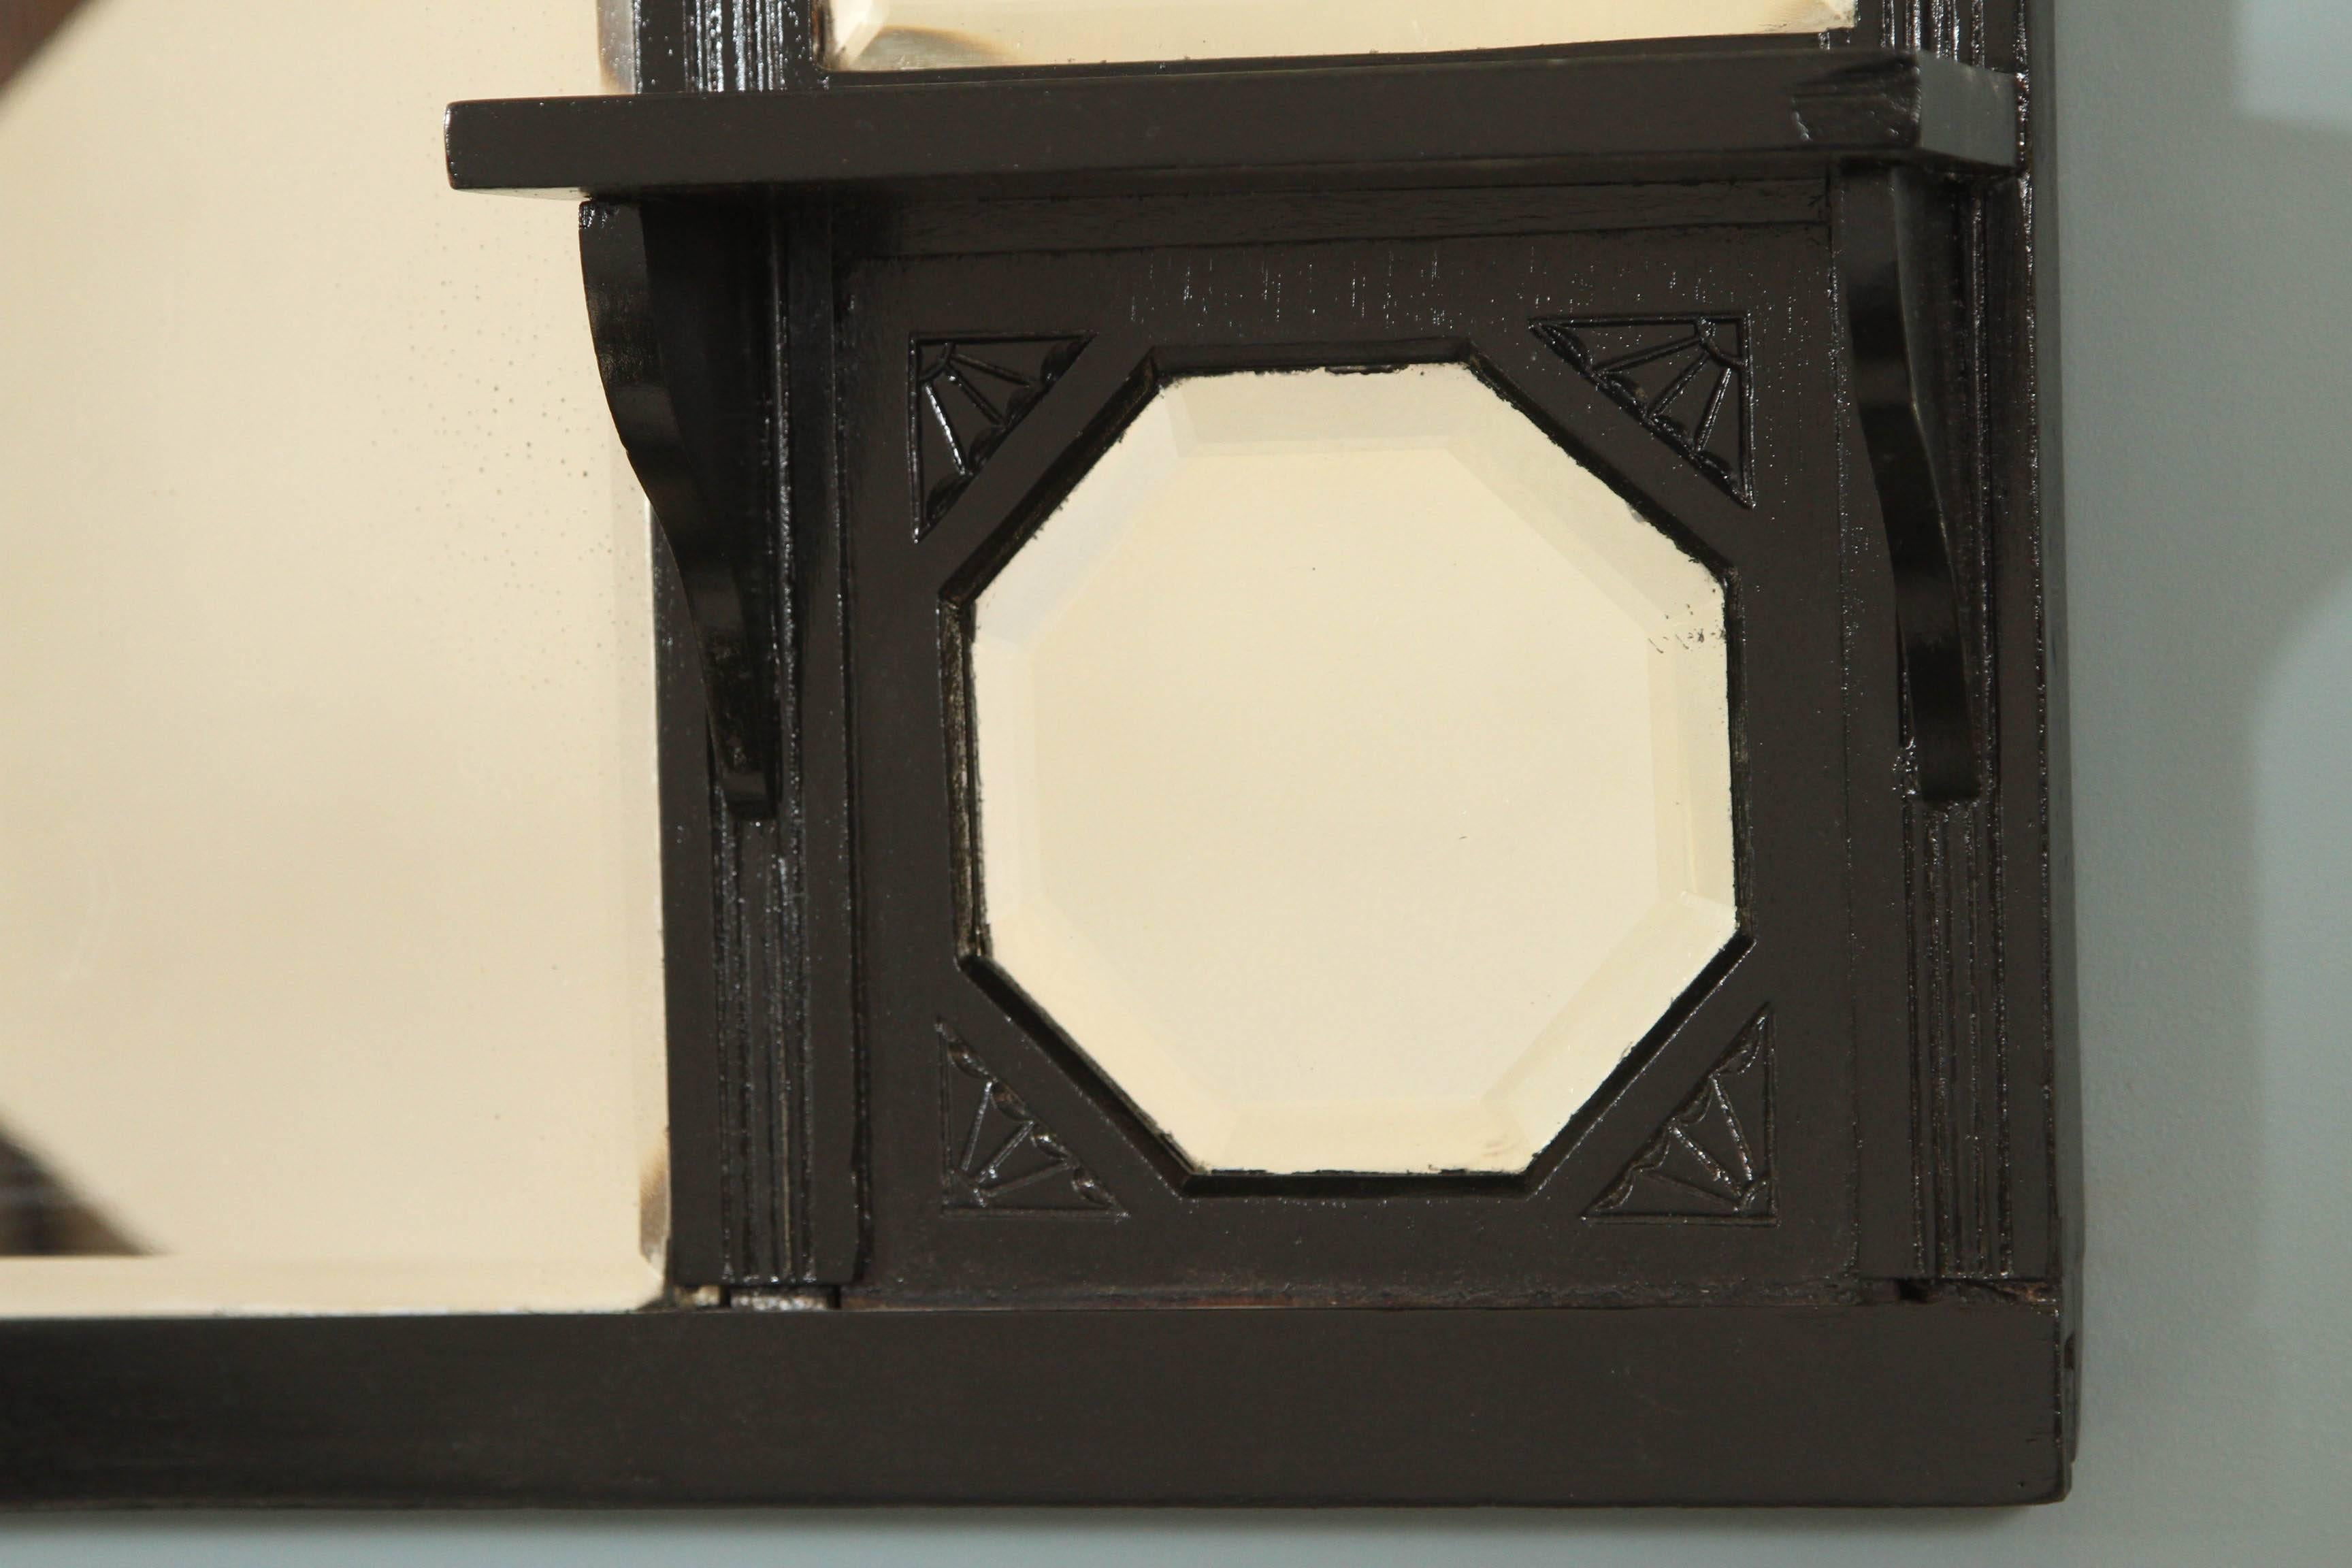 Antique Eastlake walnut mirror with small shelves and original beveled mirrors. Newly painted in a black finish. 